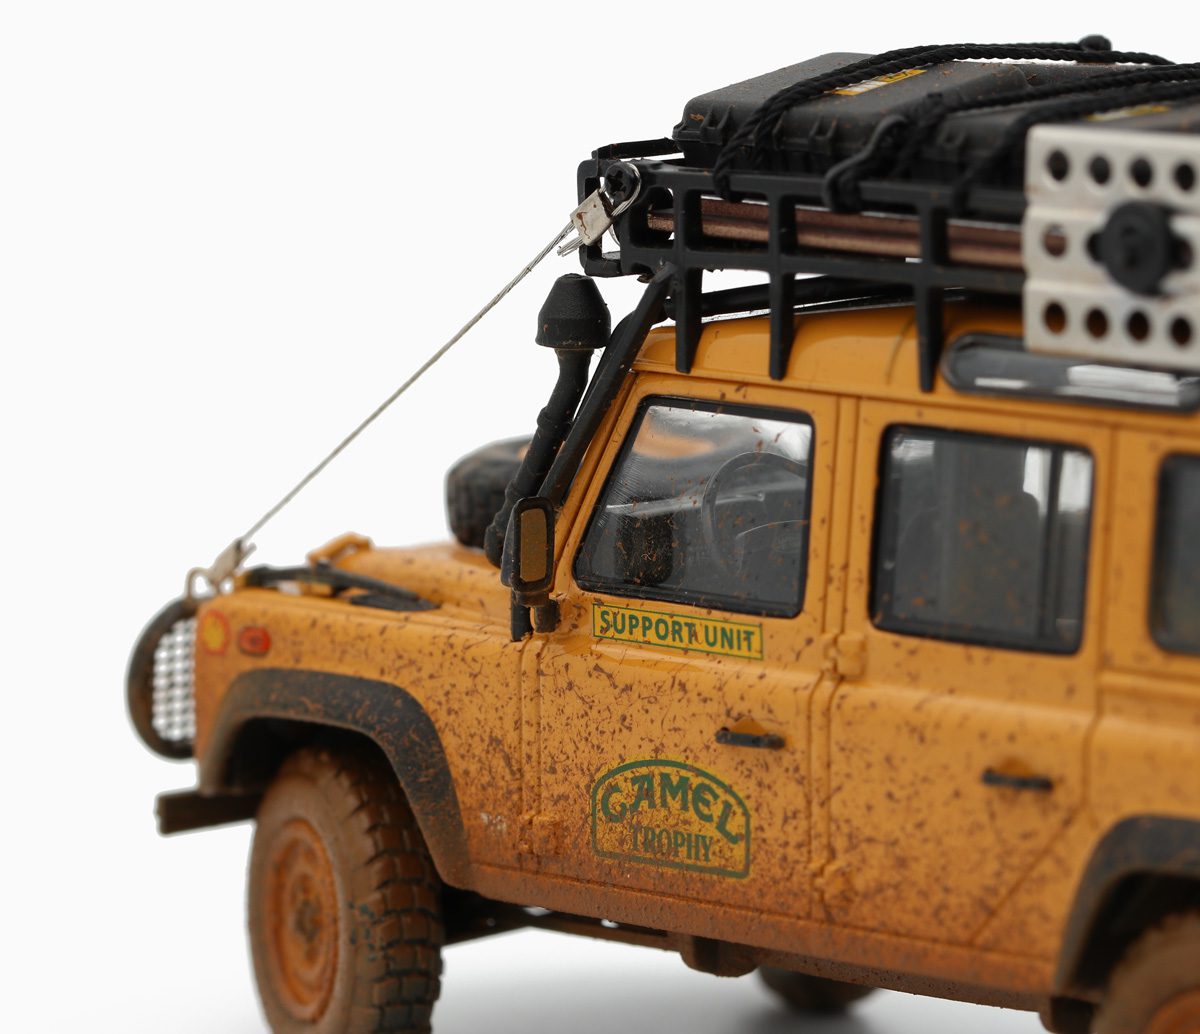 Land Rover Defender Camel 110 Trophy Dirty edition by Almost Real 1:43